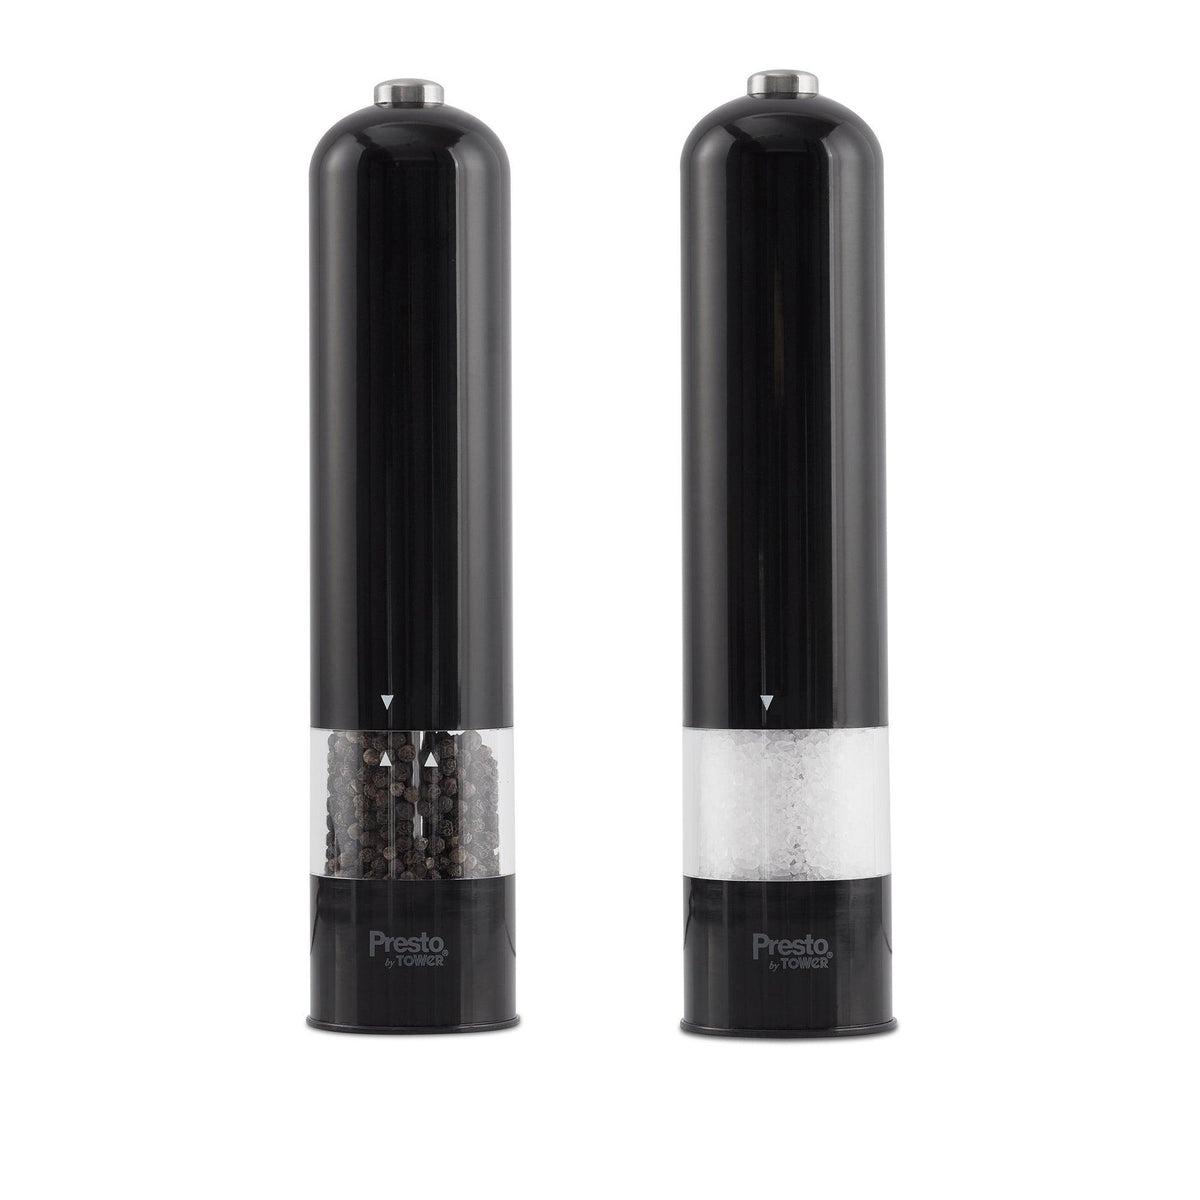 Tower Electric Salt and Pepper Set, Stainless Steel, Black and Rose Gold